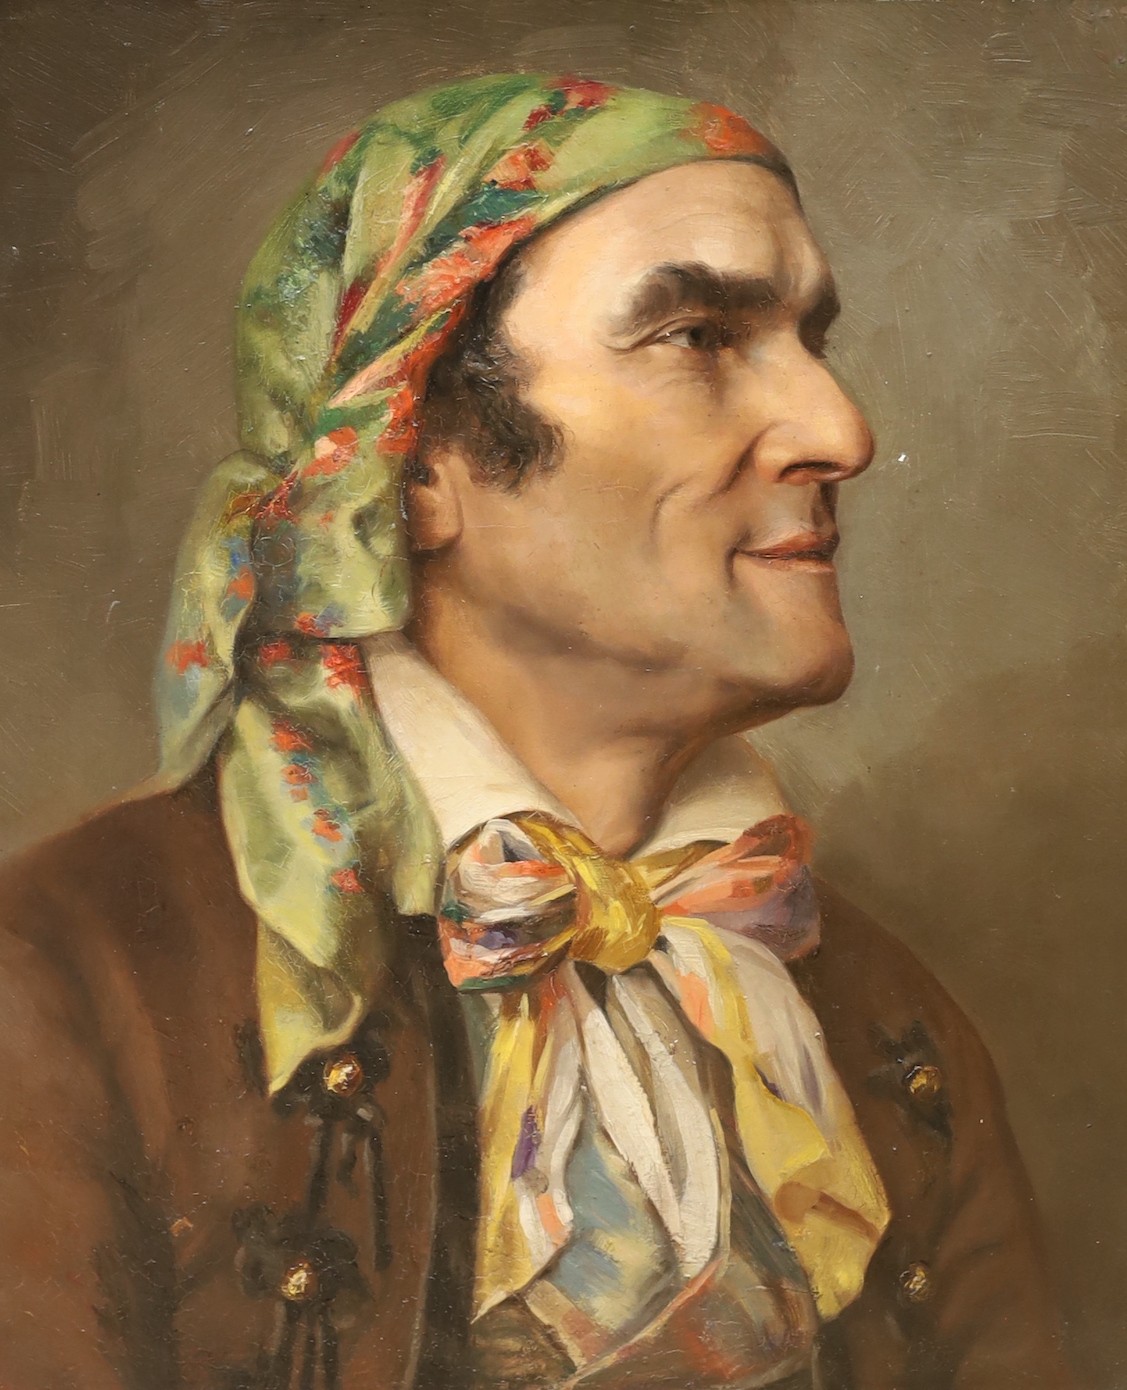 Late 19th century French School, oil on canvas, Portrait of a gentleman wearing a headscarf, 55 x 45cm